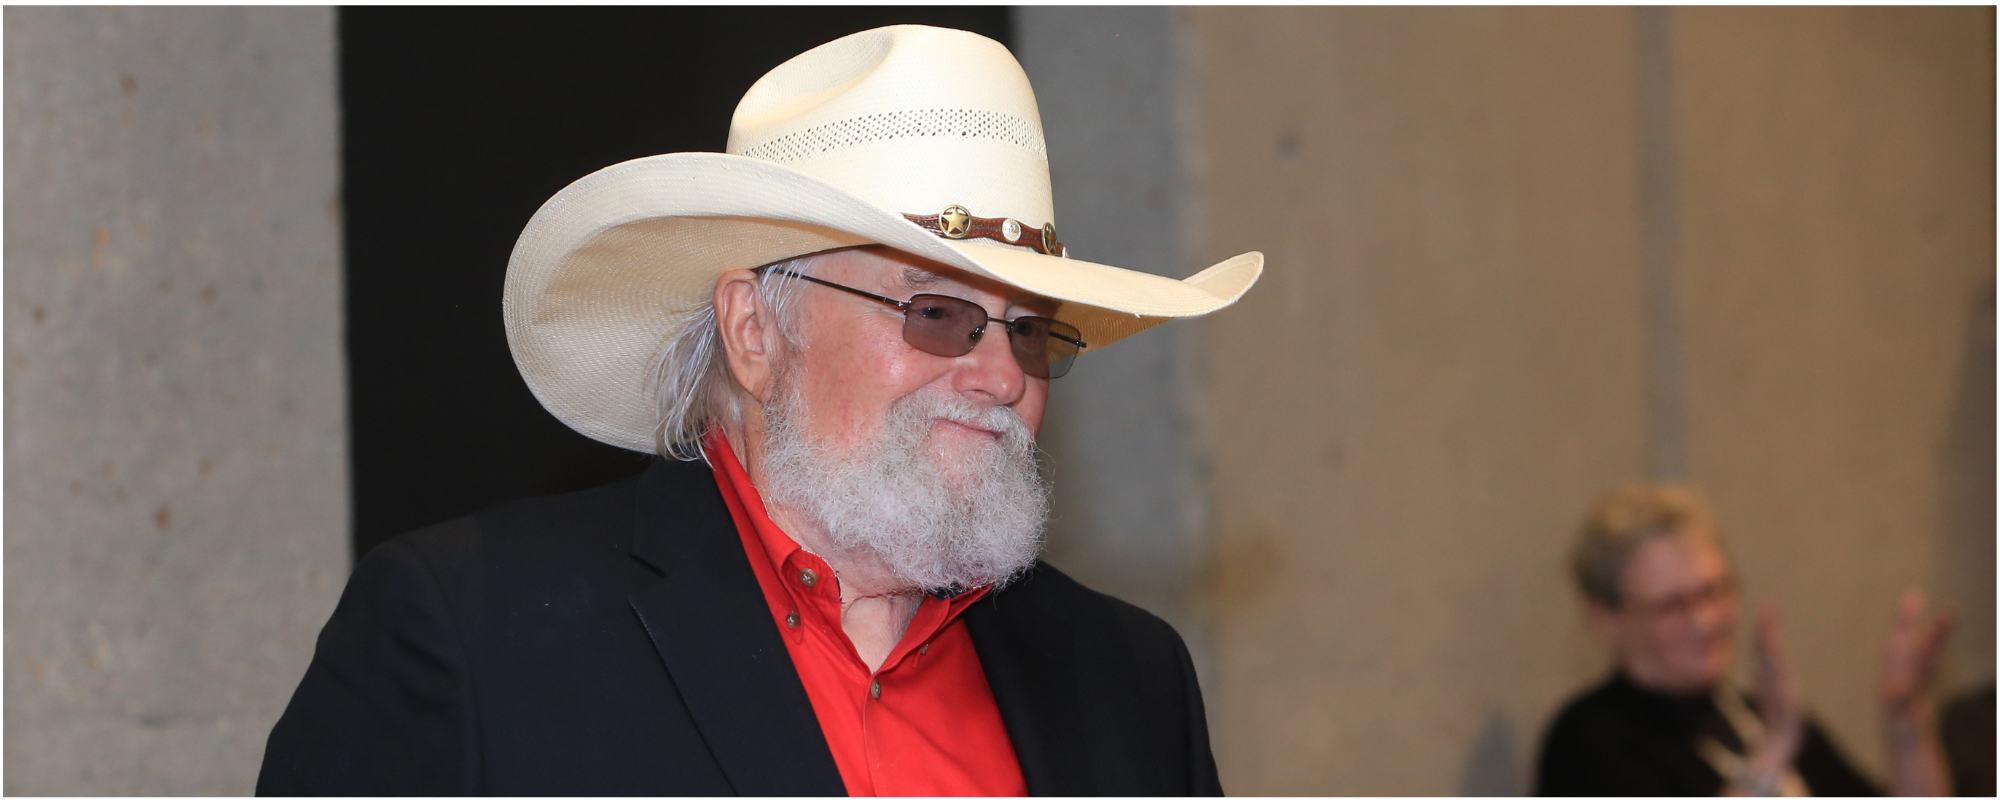 Three Charlie Daniels Albums to be Re-Released on Vinyl